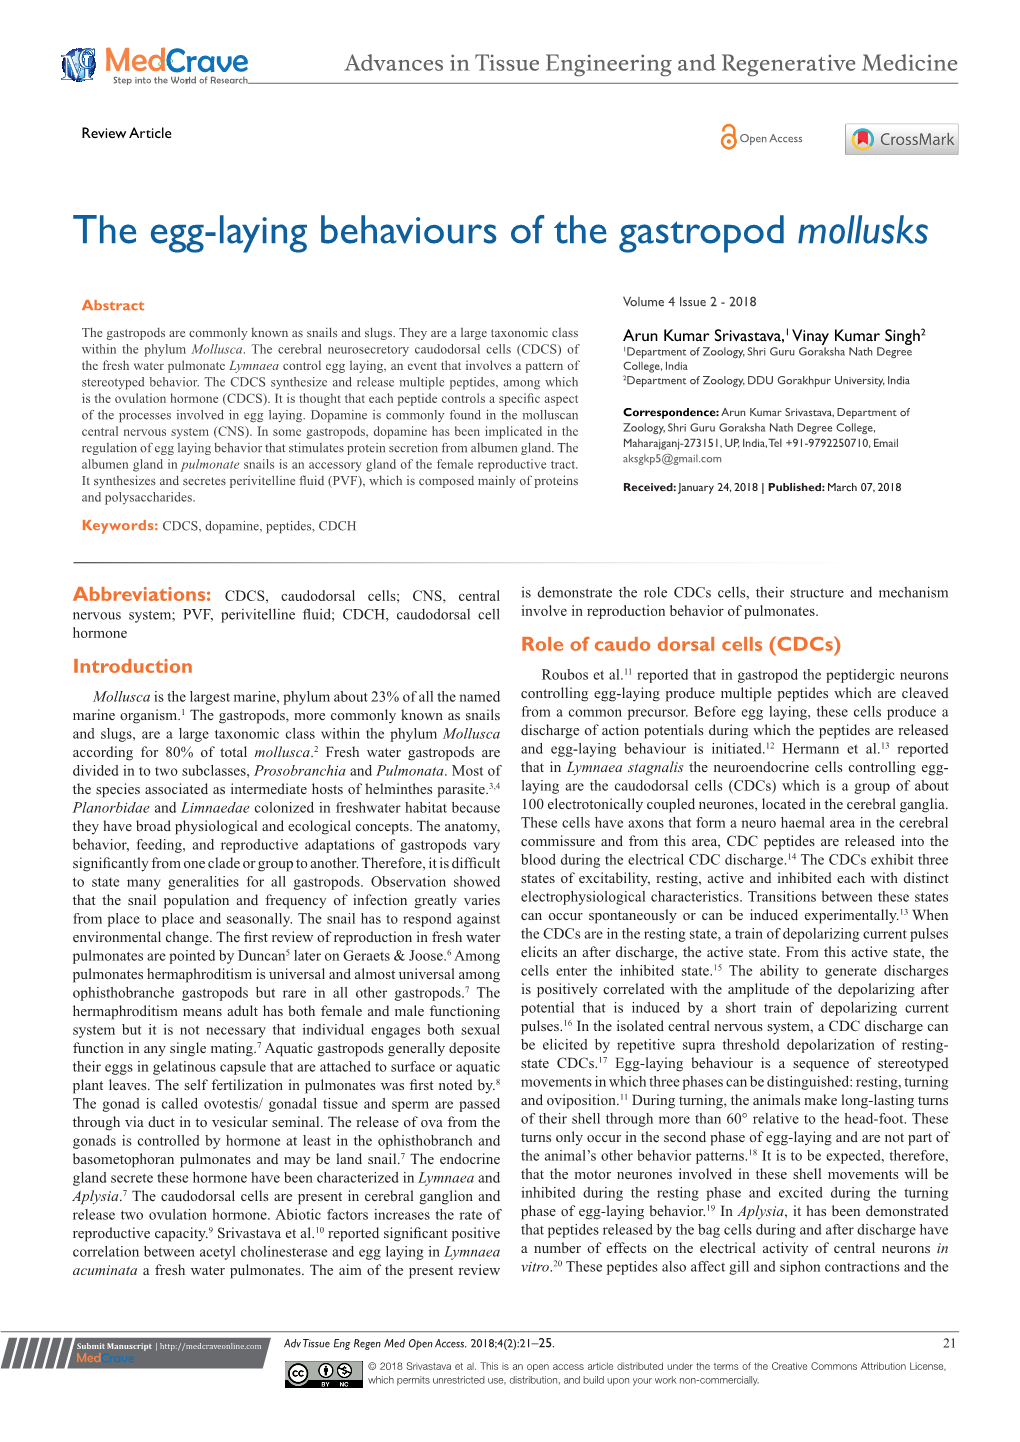 The Egg-Laying Behaviours of the Gastropod Mollusks